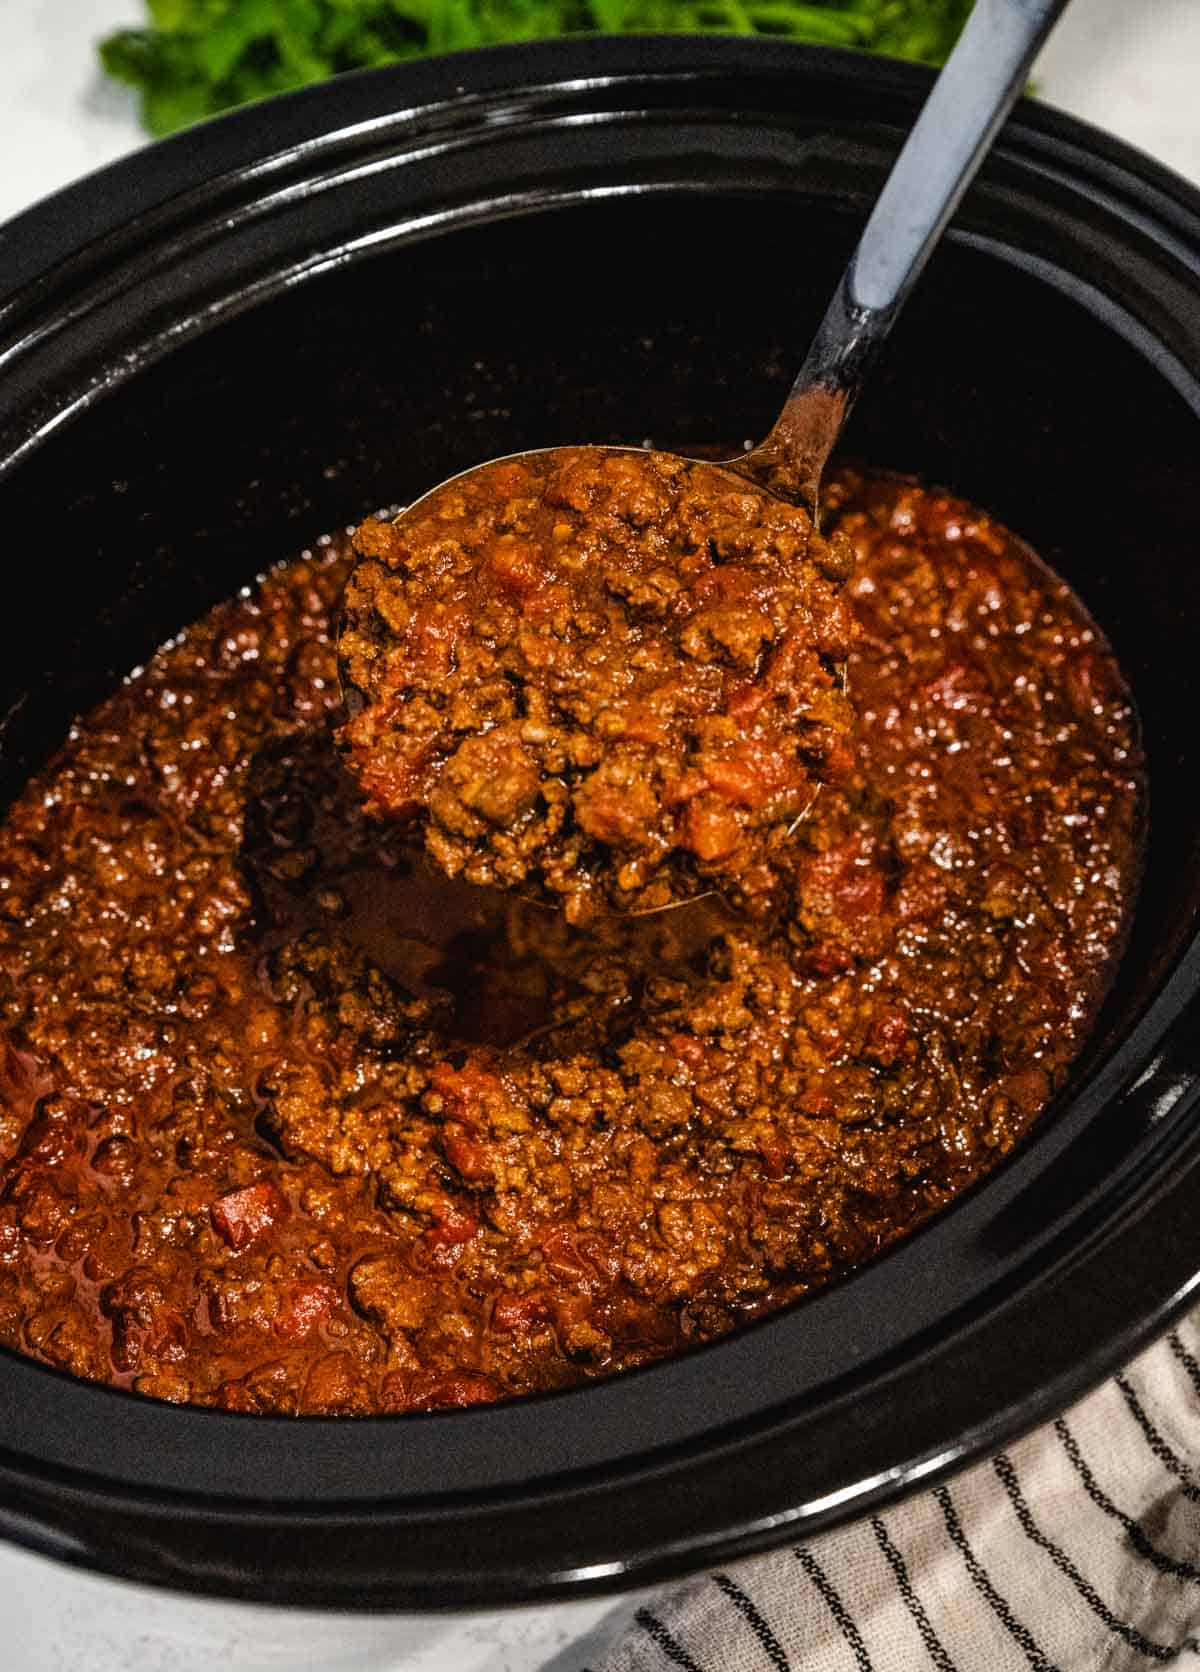 A crock pot filled with keto chili scooped out with a silver ladle.